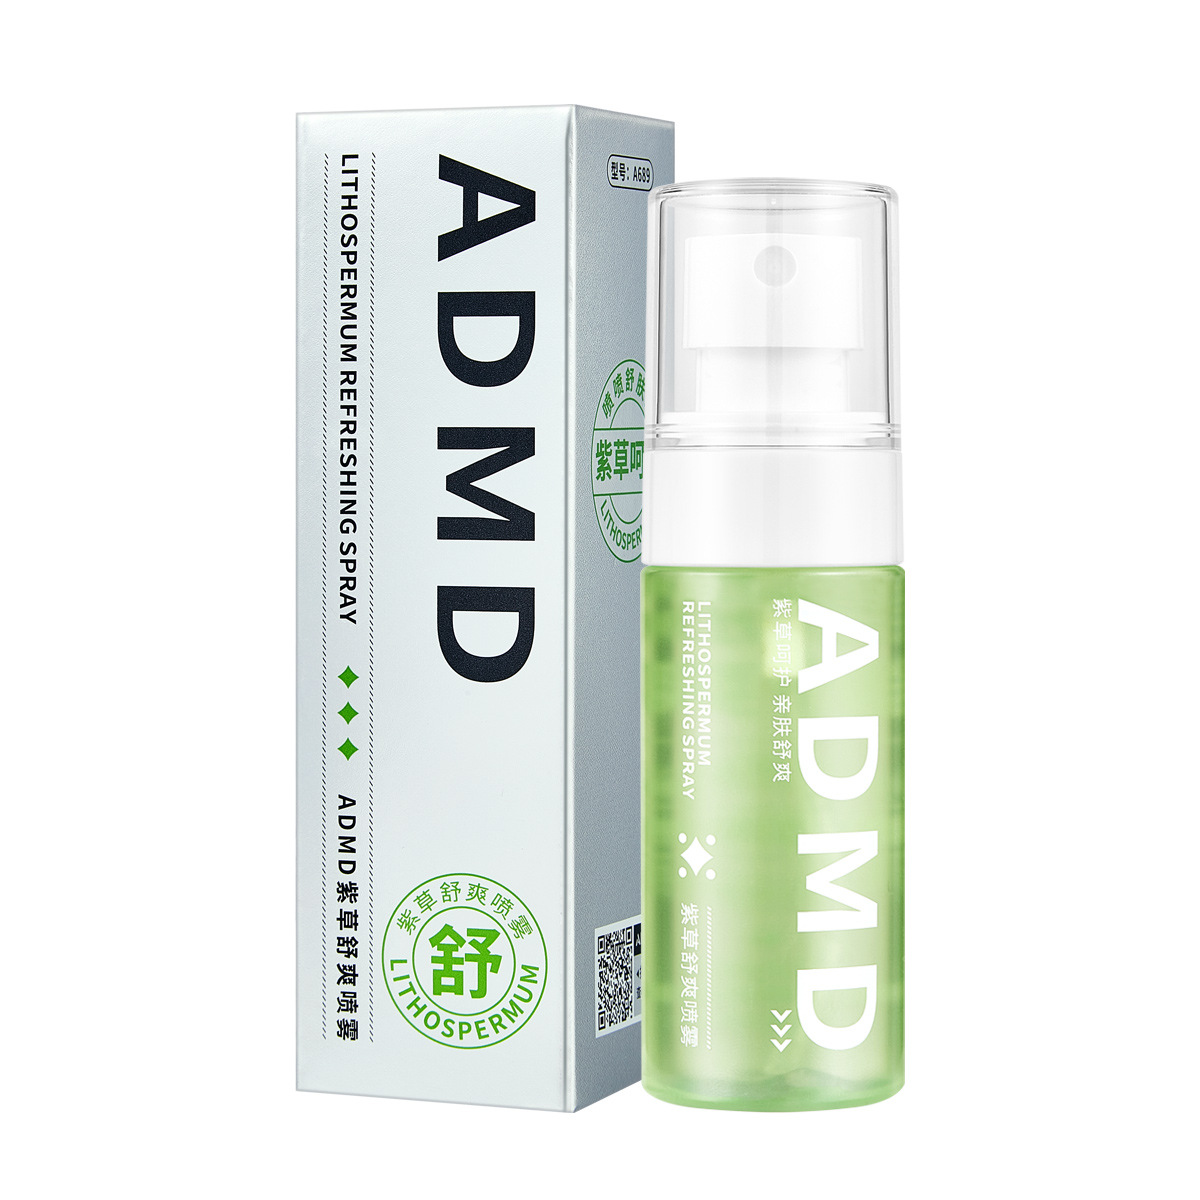 ADMD shikonin soothing and refreshing spray herb mild repair cool and itchy small spray anti-mosquito bite